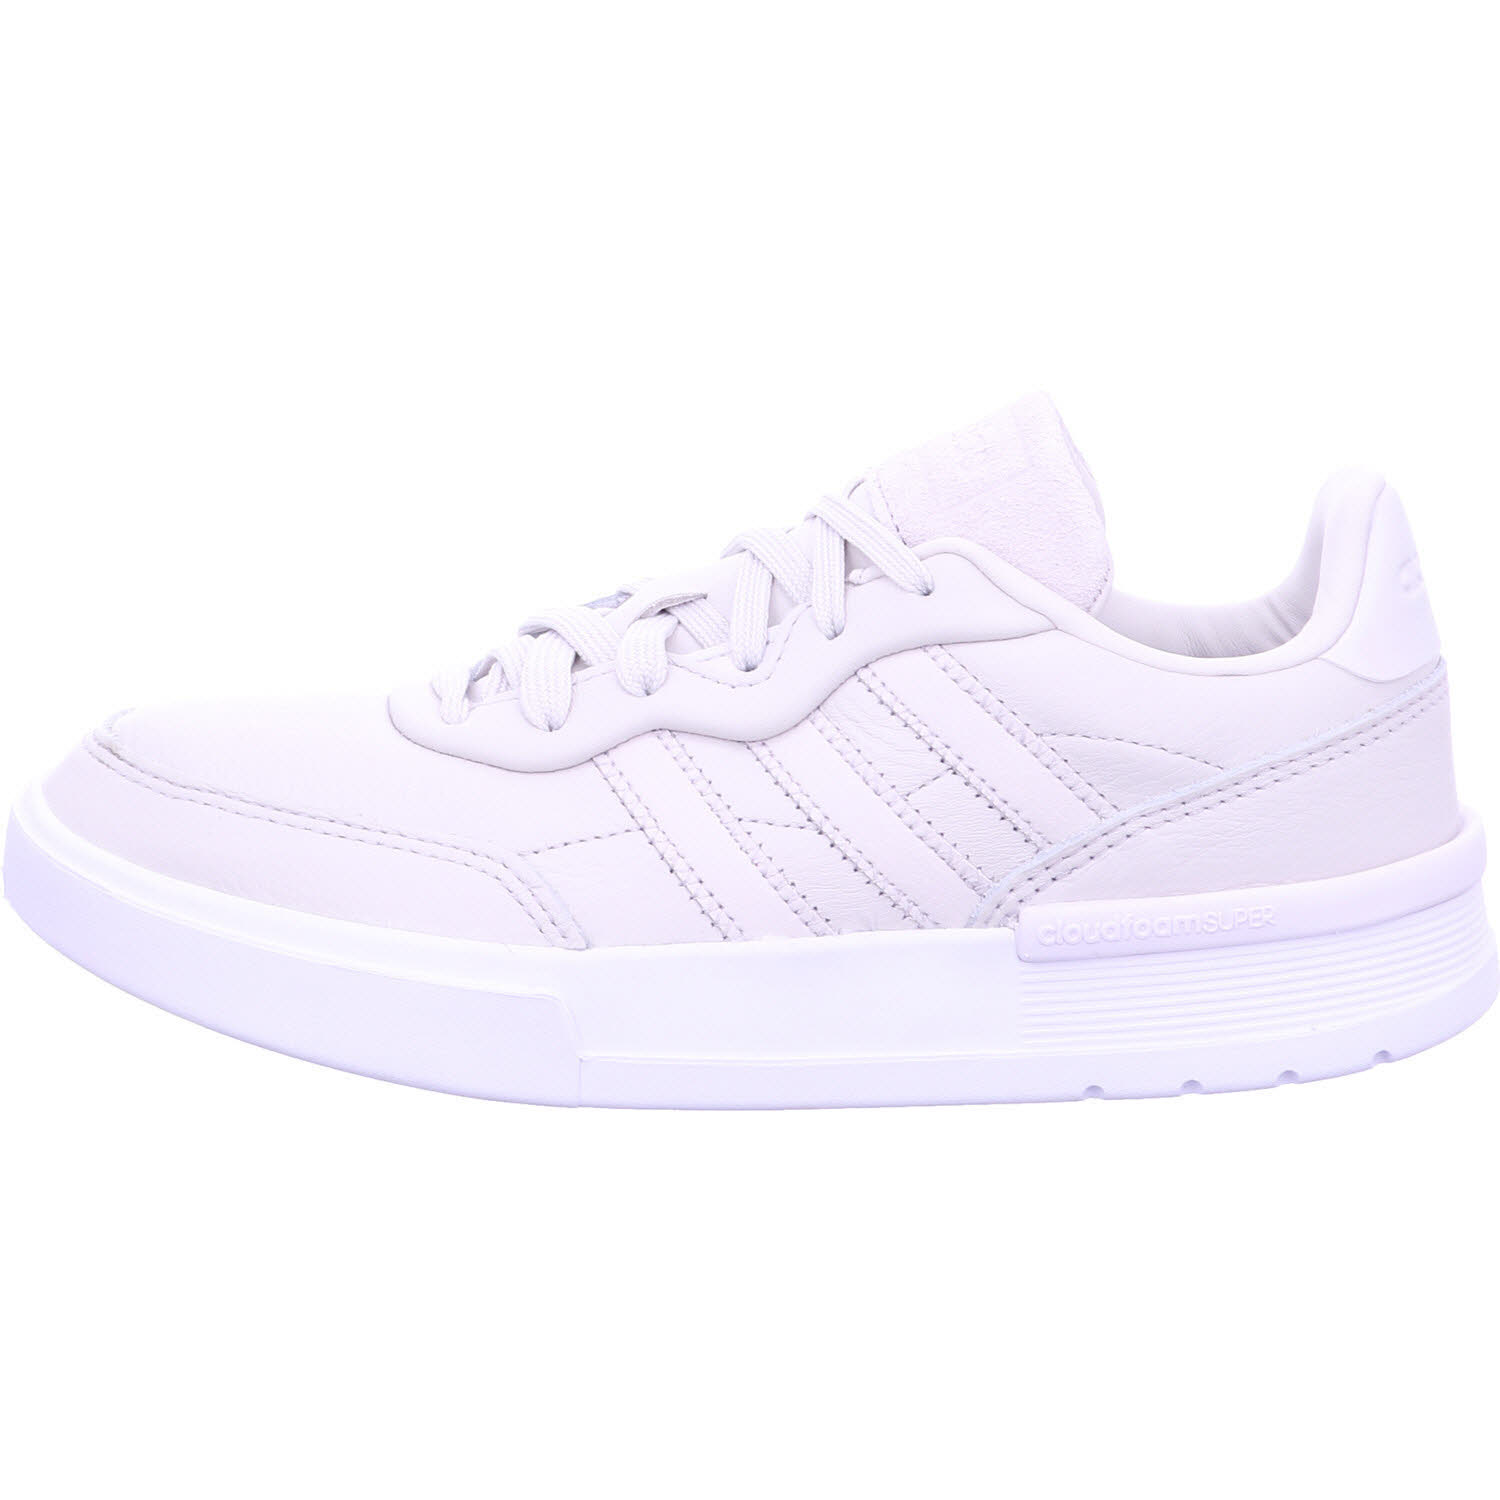 Adidas Sneaker CLUBCOURT,GREONE/GREONE/DSHGRY